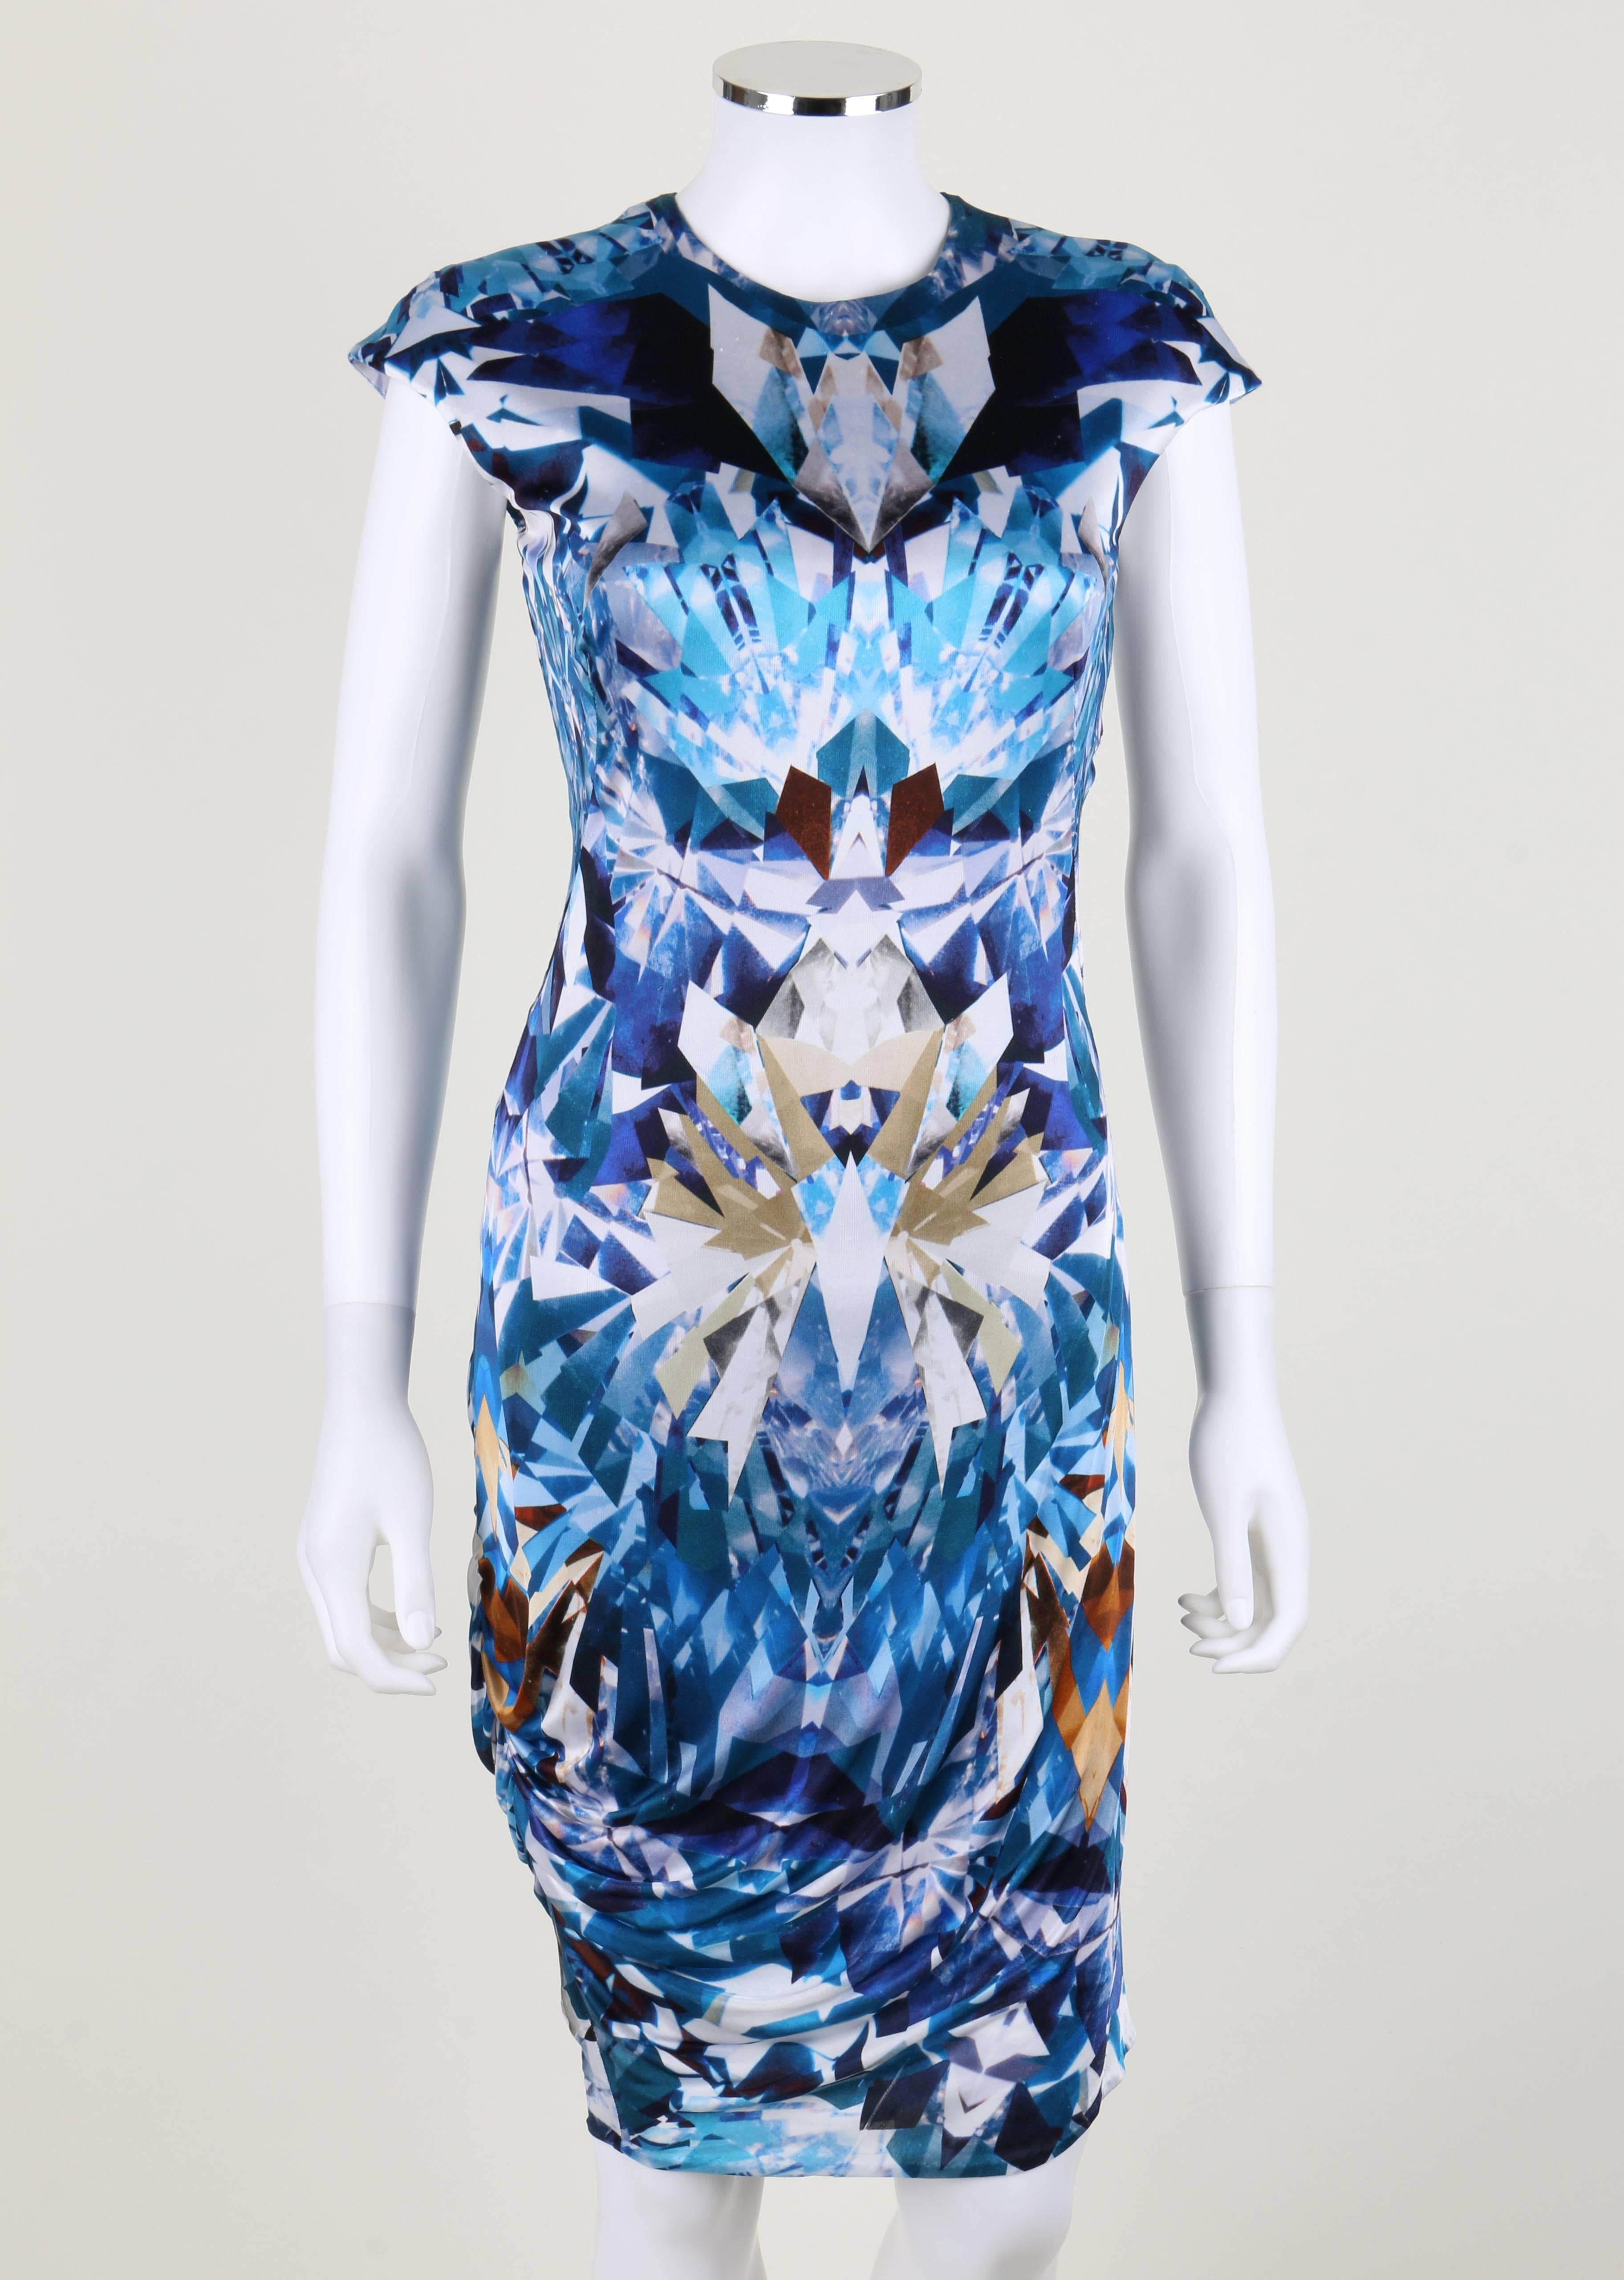 Rare and iconic blue kaleidoscope print dress from Alexander McQueen's Spring-Summer 2009 